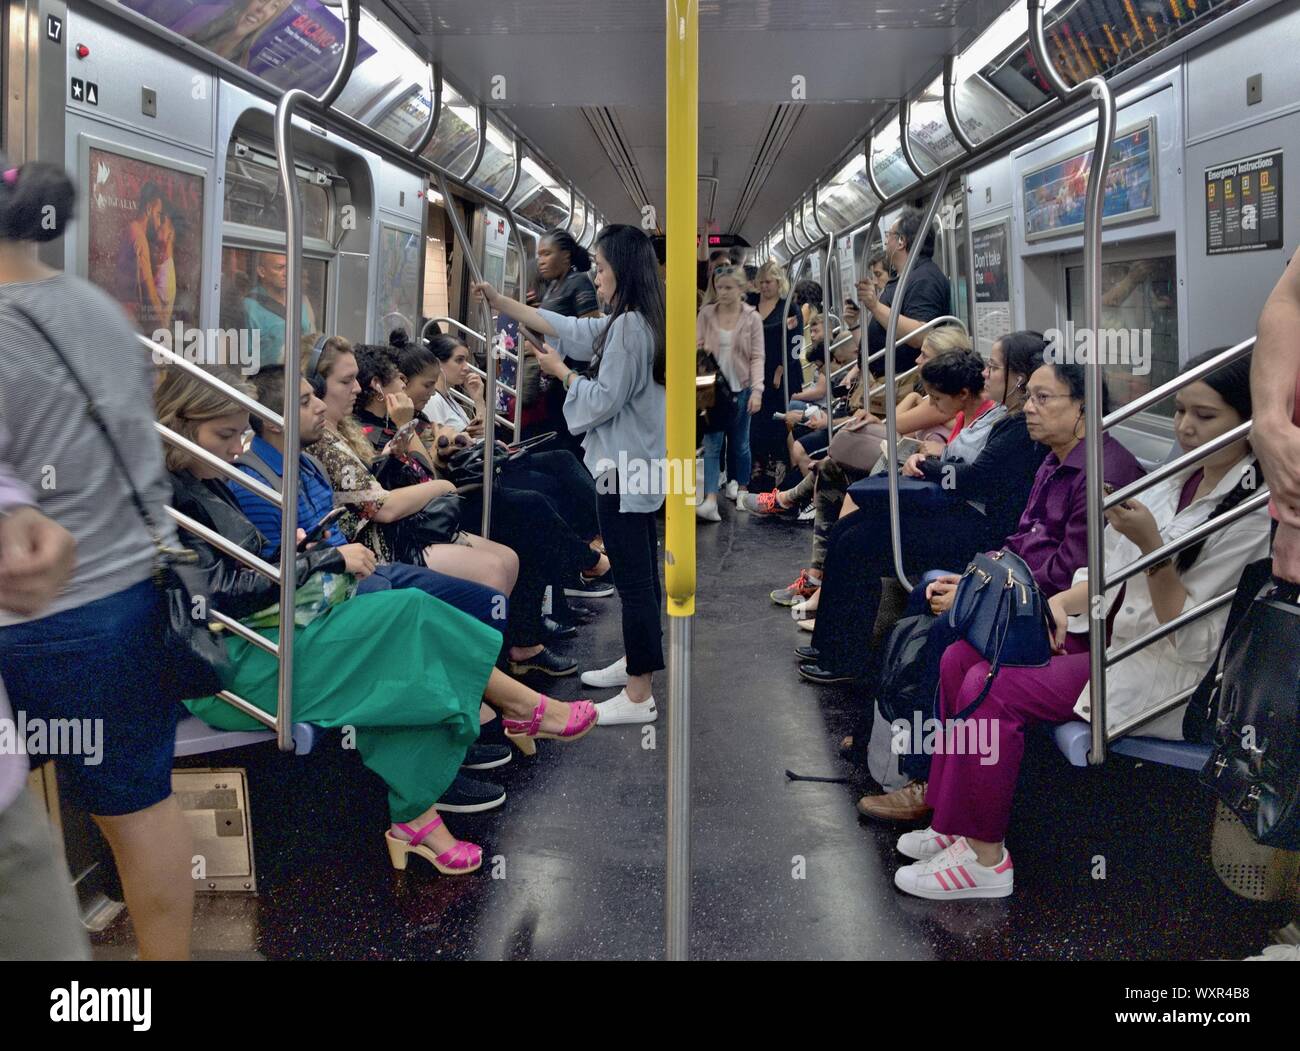 People in Crowded Subway Train NYC Busy City Lifestyle Stock Photo